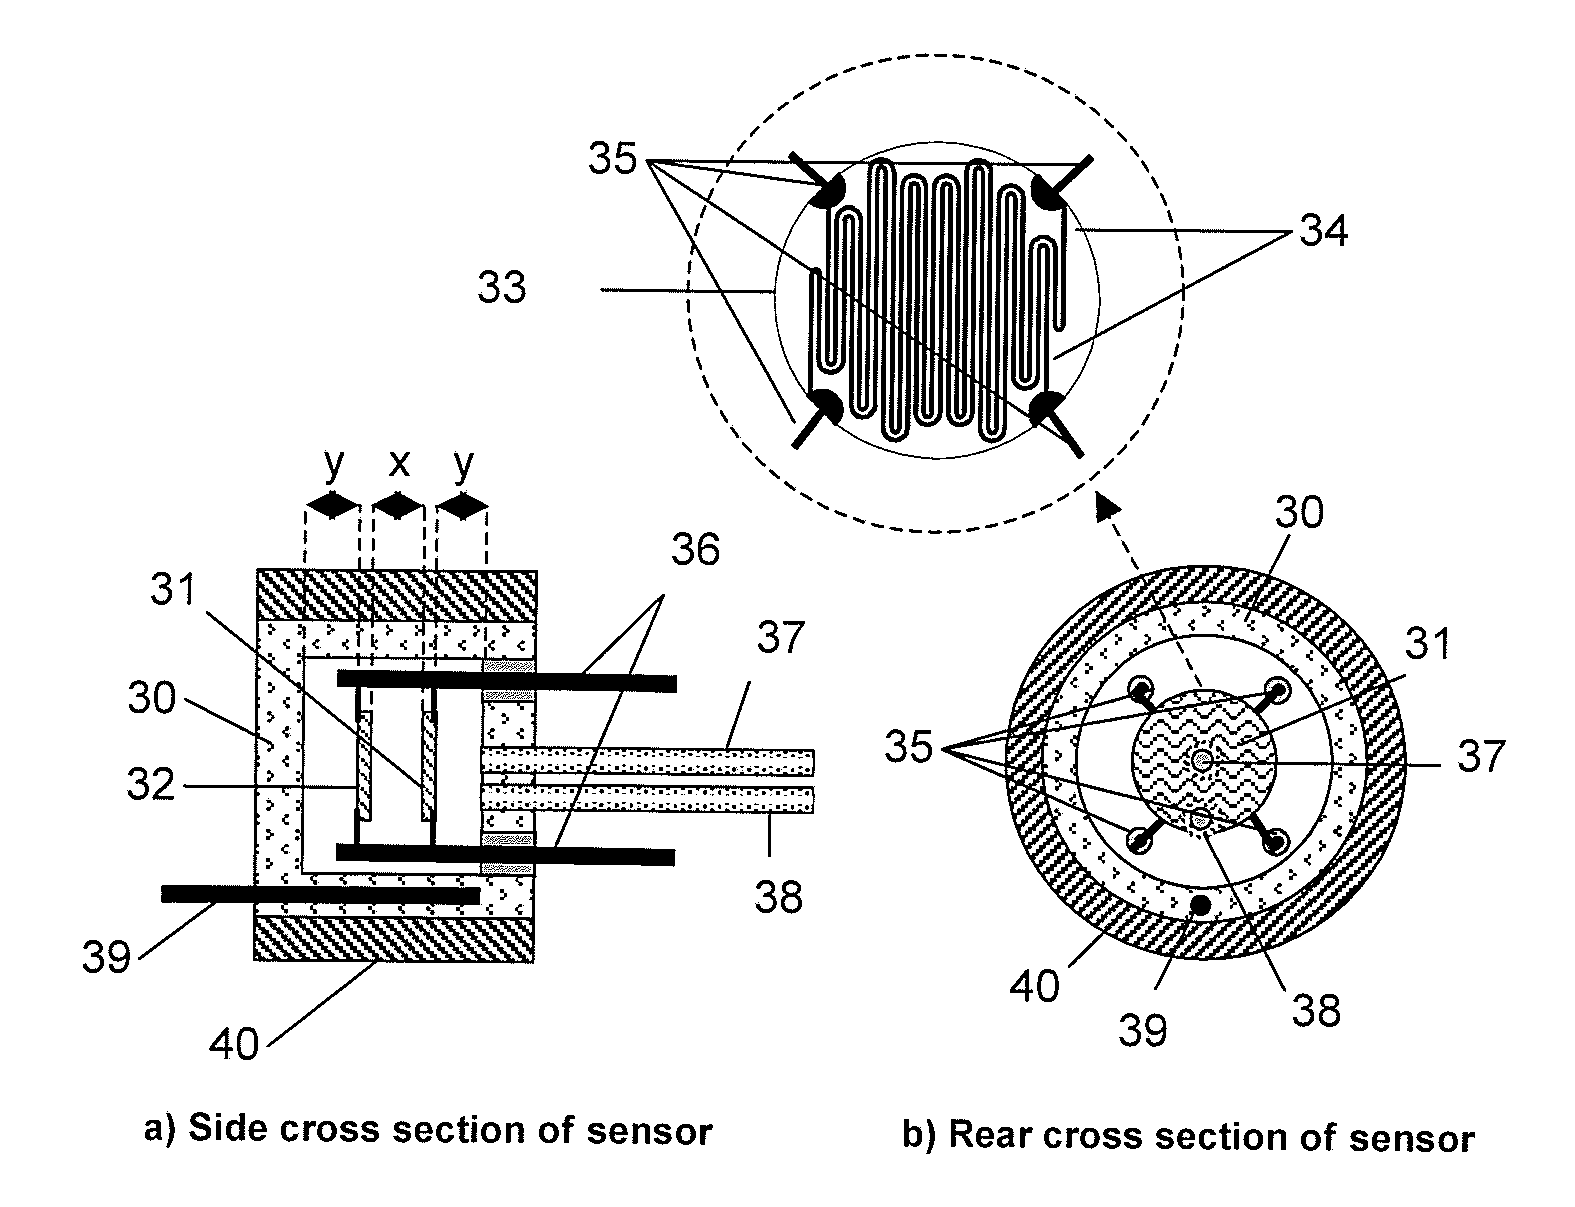 Apparatus for measuring the flow rate of a fluid